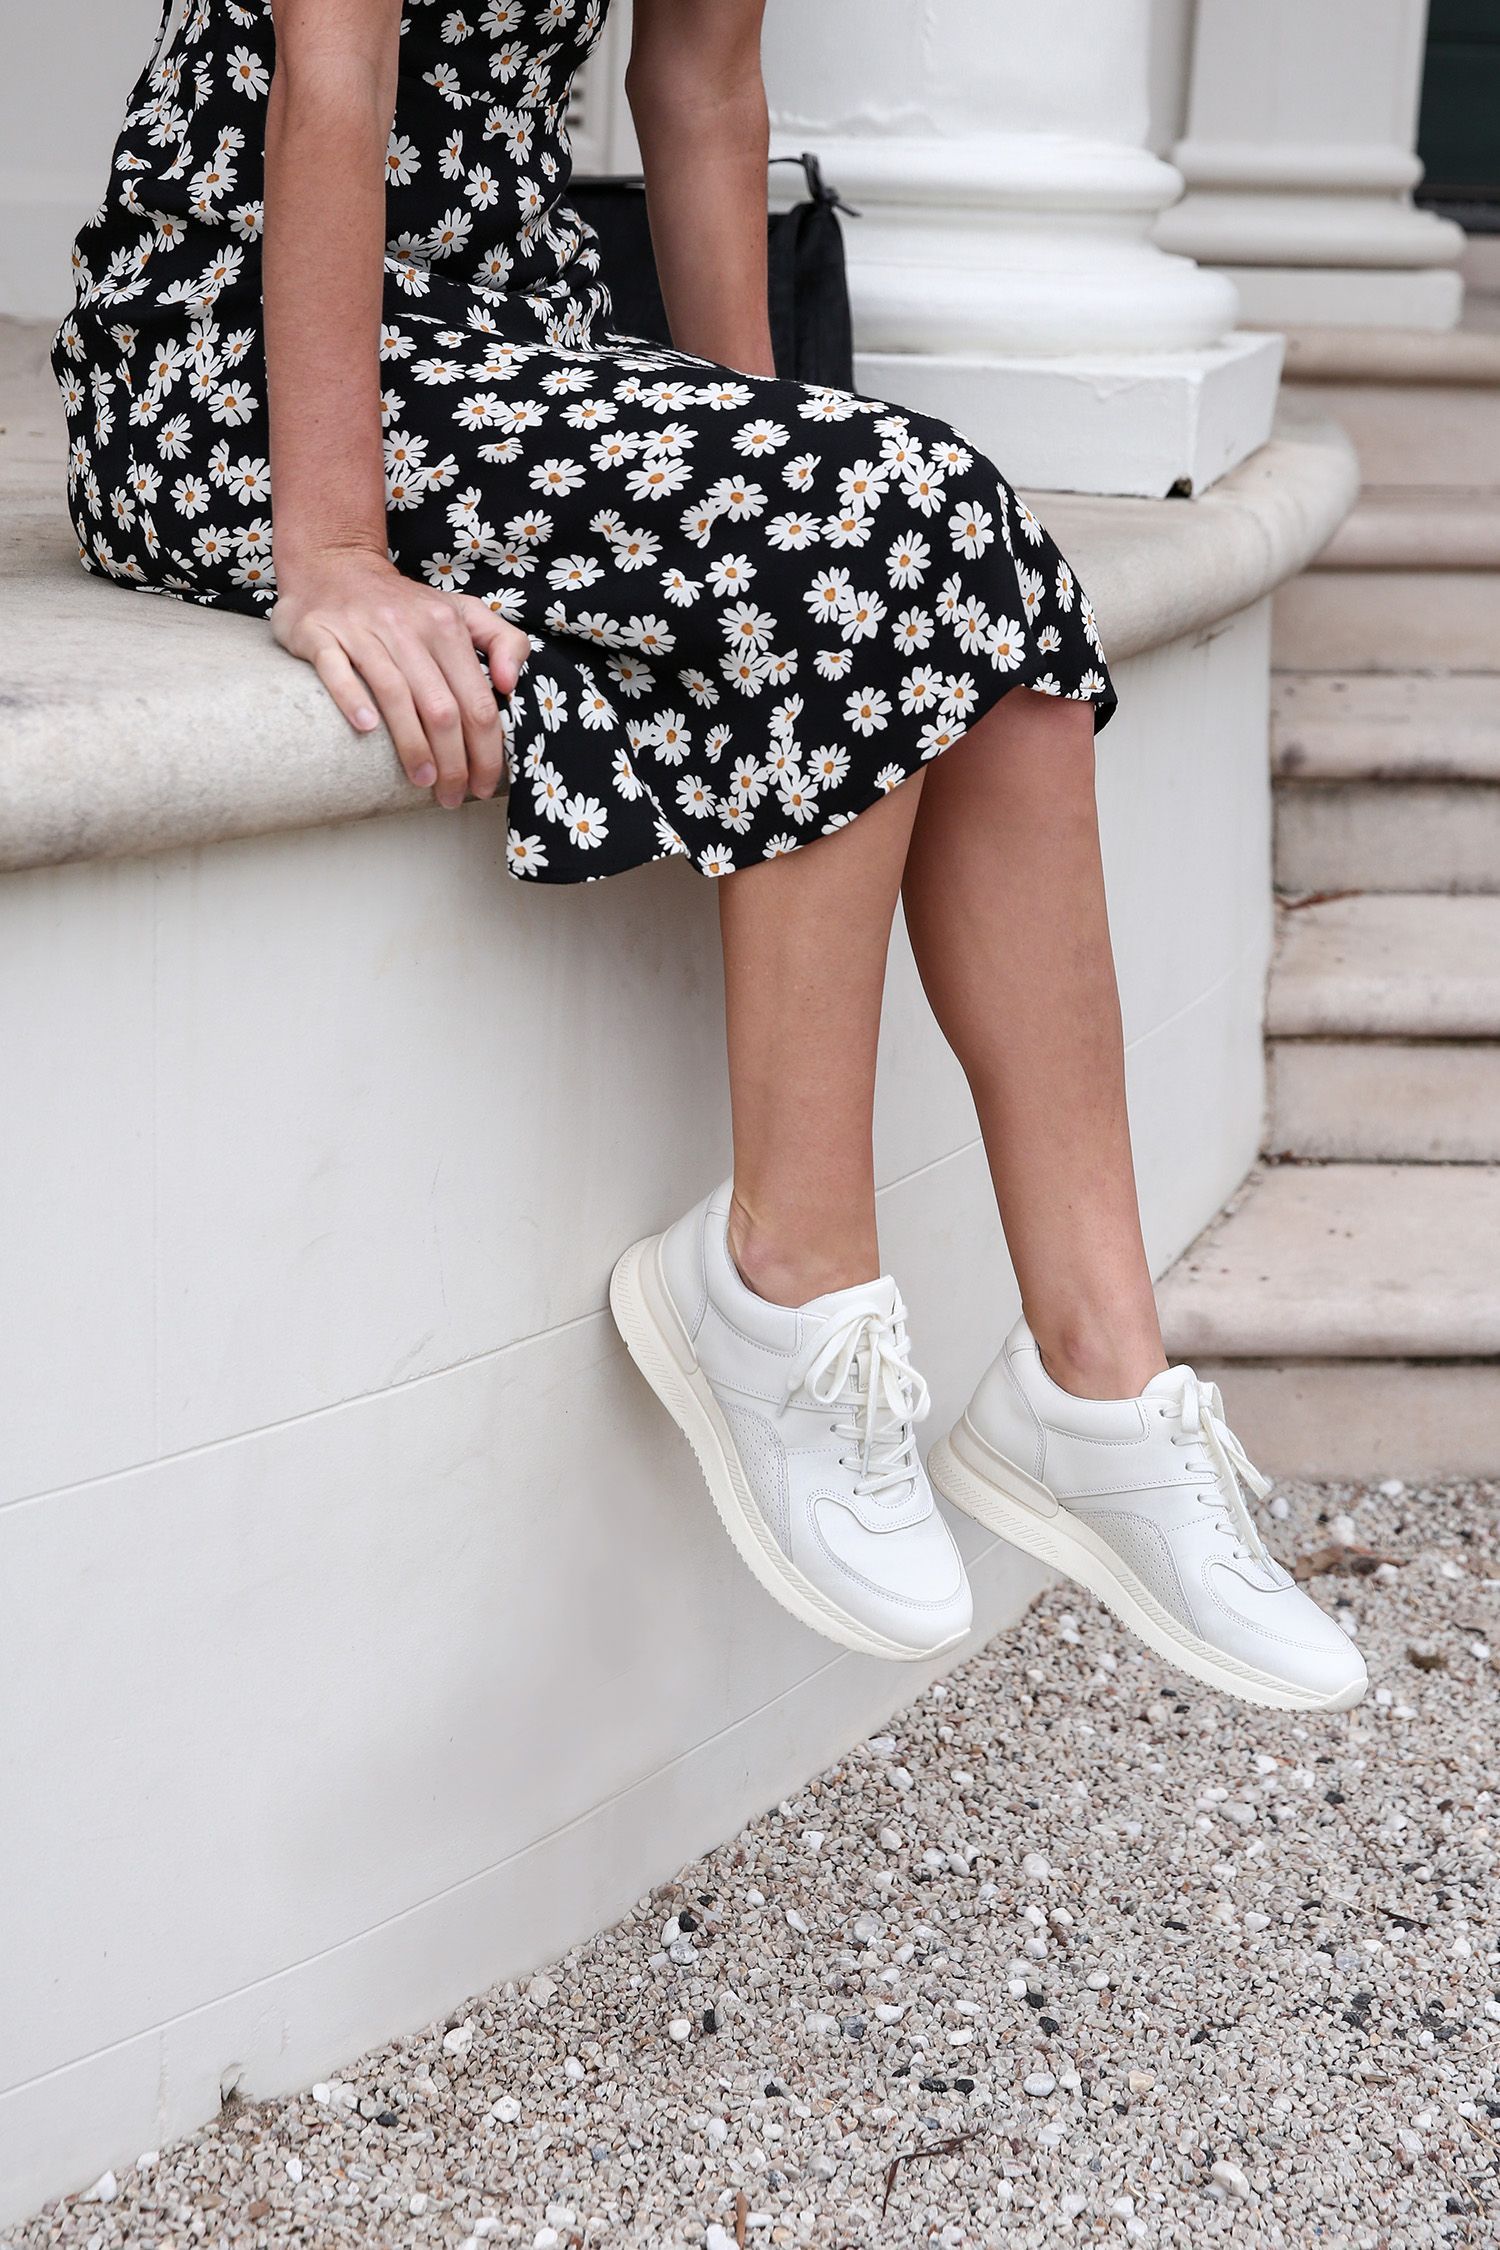 Styling the Tread by Everlane sneakers three ways | Mademoiselle | A Minimalist Fashion Blog - Styling the Tread by Everlane sneakers three ways | Mademoiselle | A Minimalist Fashion Blog -   22 style Inspiration sneakers ideas